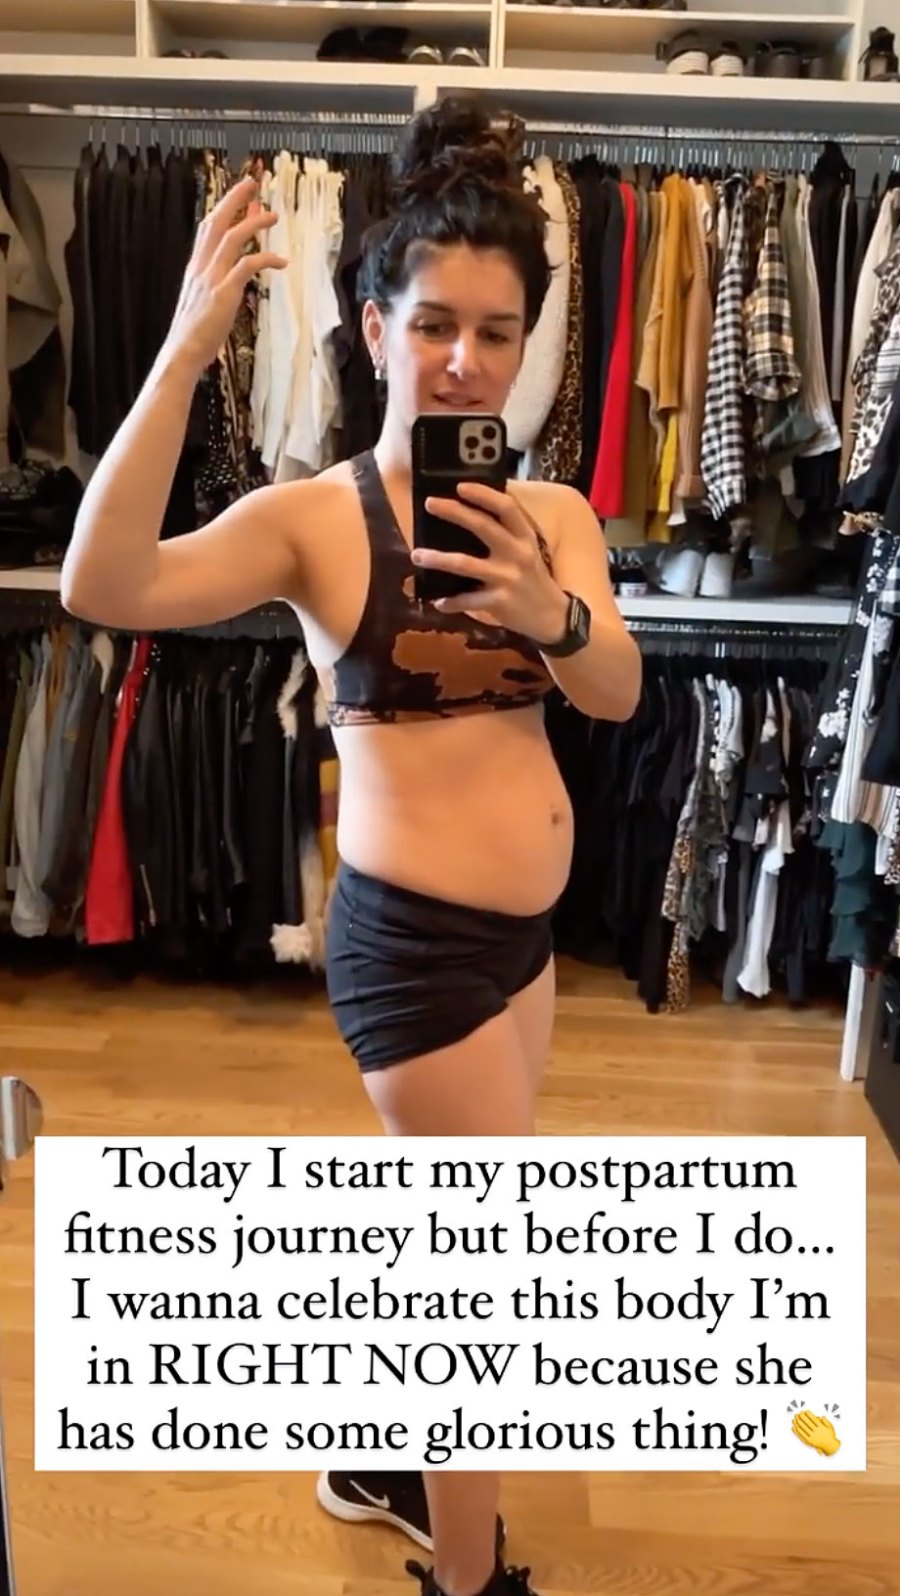 Brittany Nassif Shows Off Postpartum Body 2 Weeks After Delivery